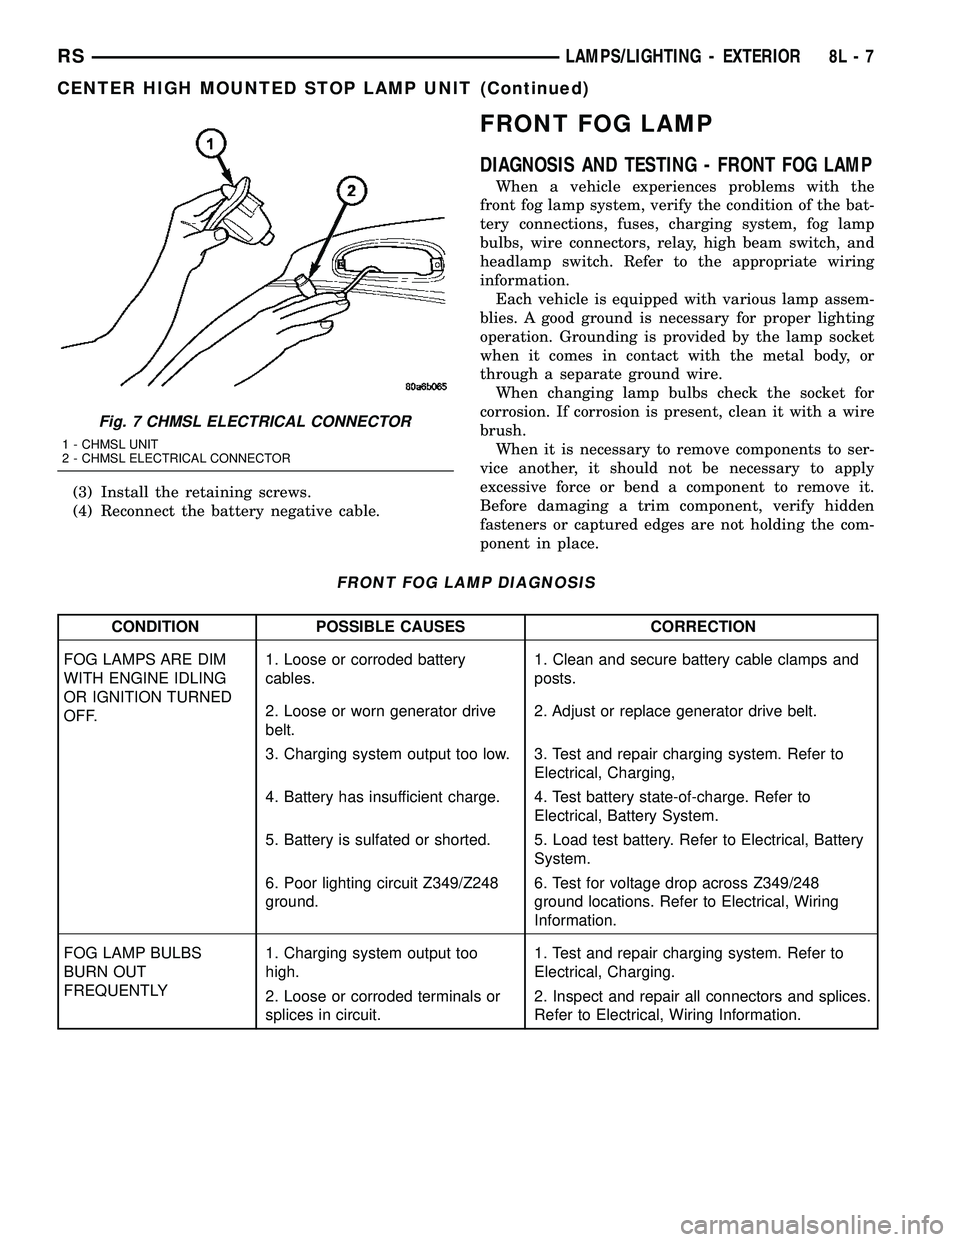 CHRYSLER VOYAGER 2005  Service Manual (3) Install the retaining screws.
(4) Reconnect the battery negative cable.
FRONT FOG LAMP
DIAGNOSIS AND TESTING - FRONT FOG LAMP
When a vehicle experiences problems with the
front fog lamp system, ve